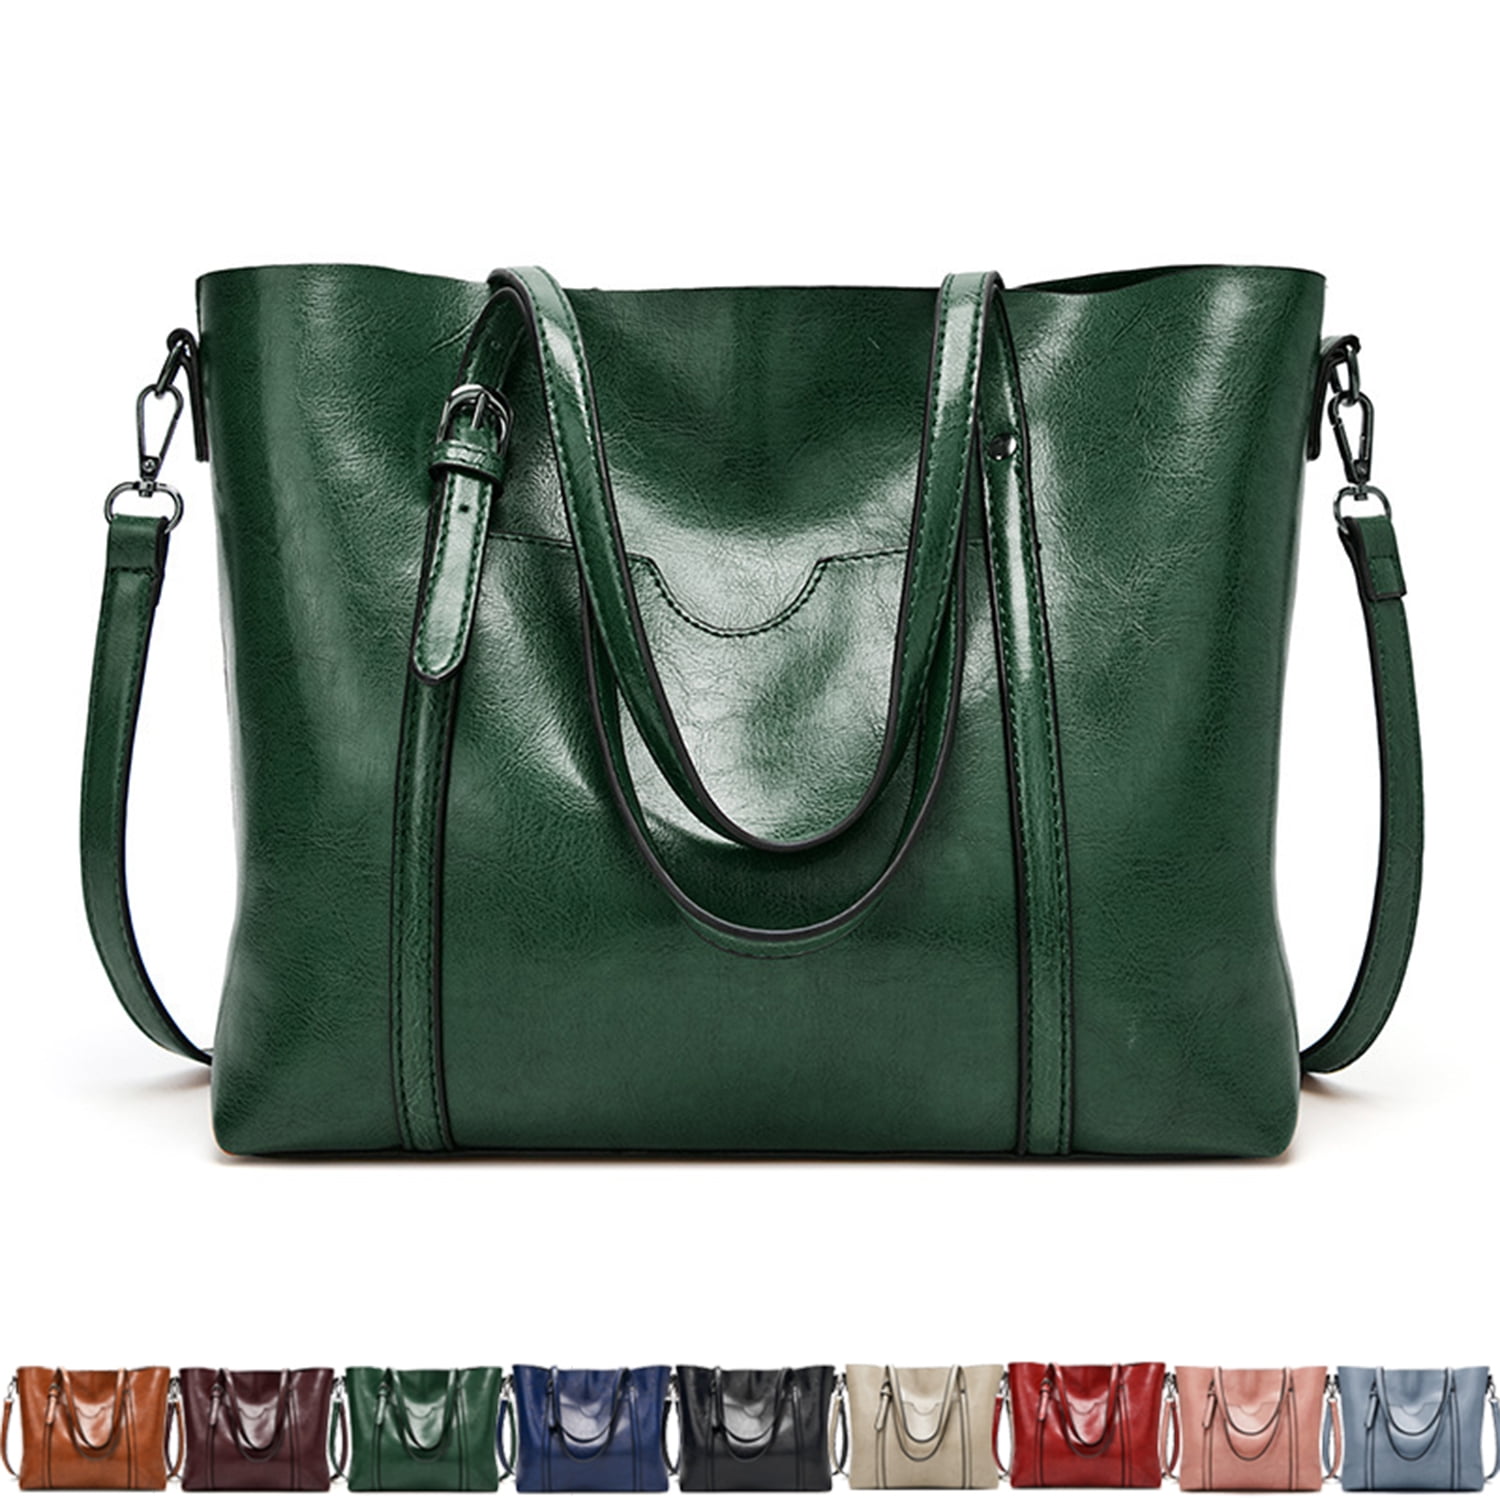 Leather Tote Bags: East West Tote | leather handbags by KMM & Co.